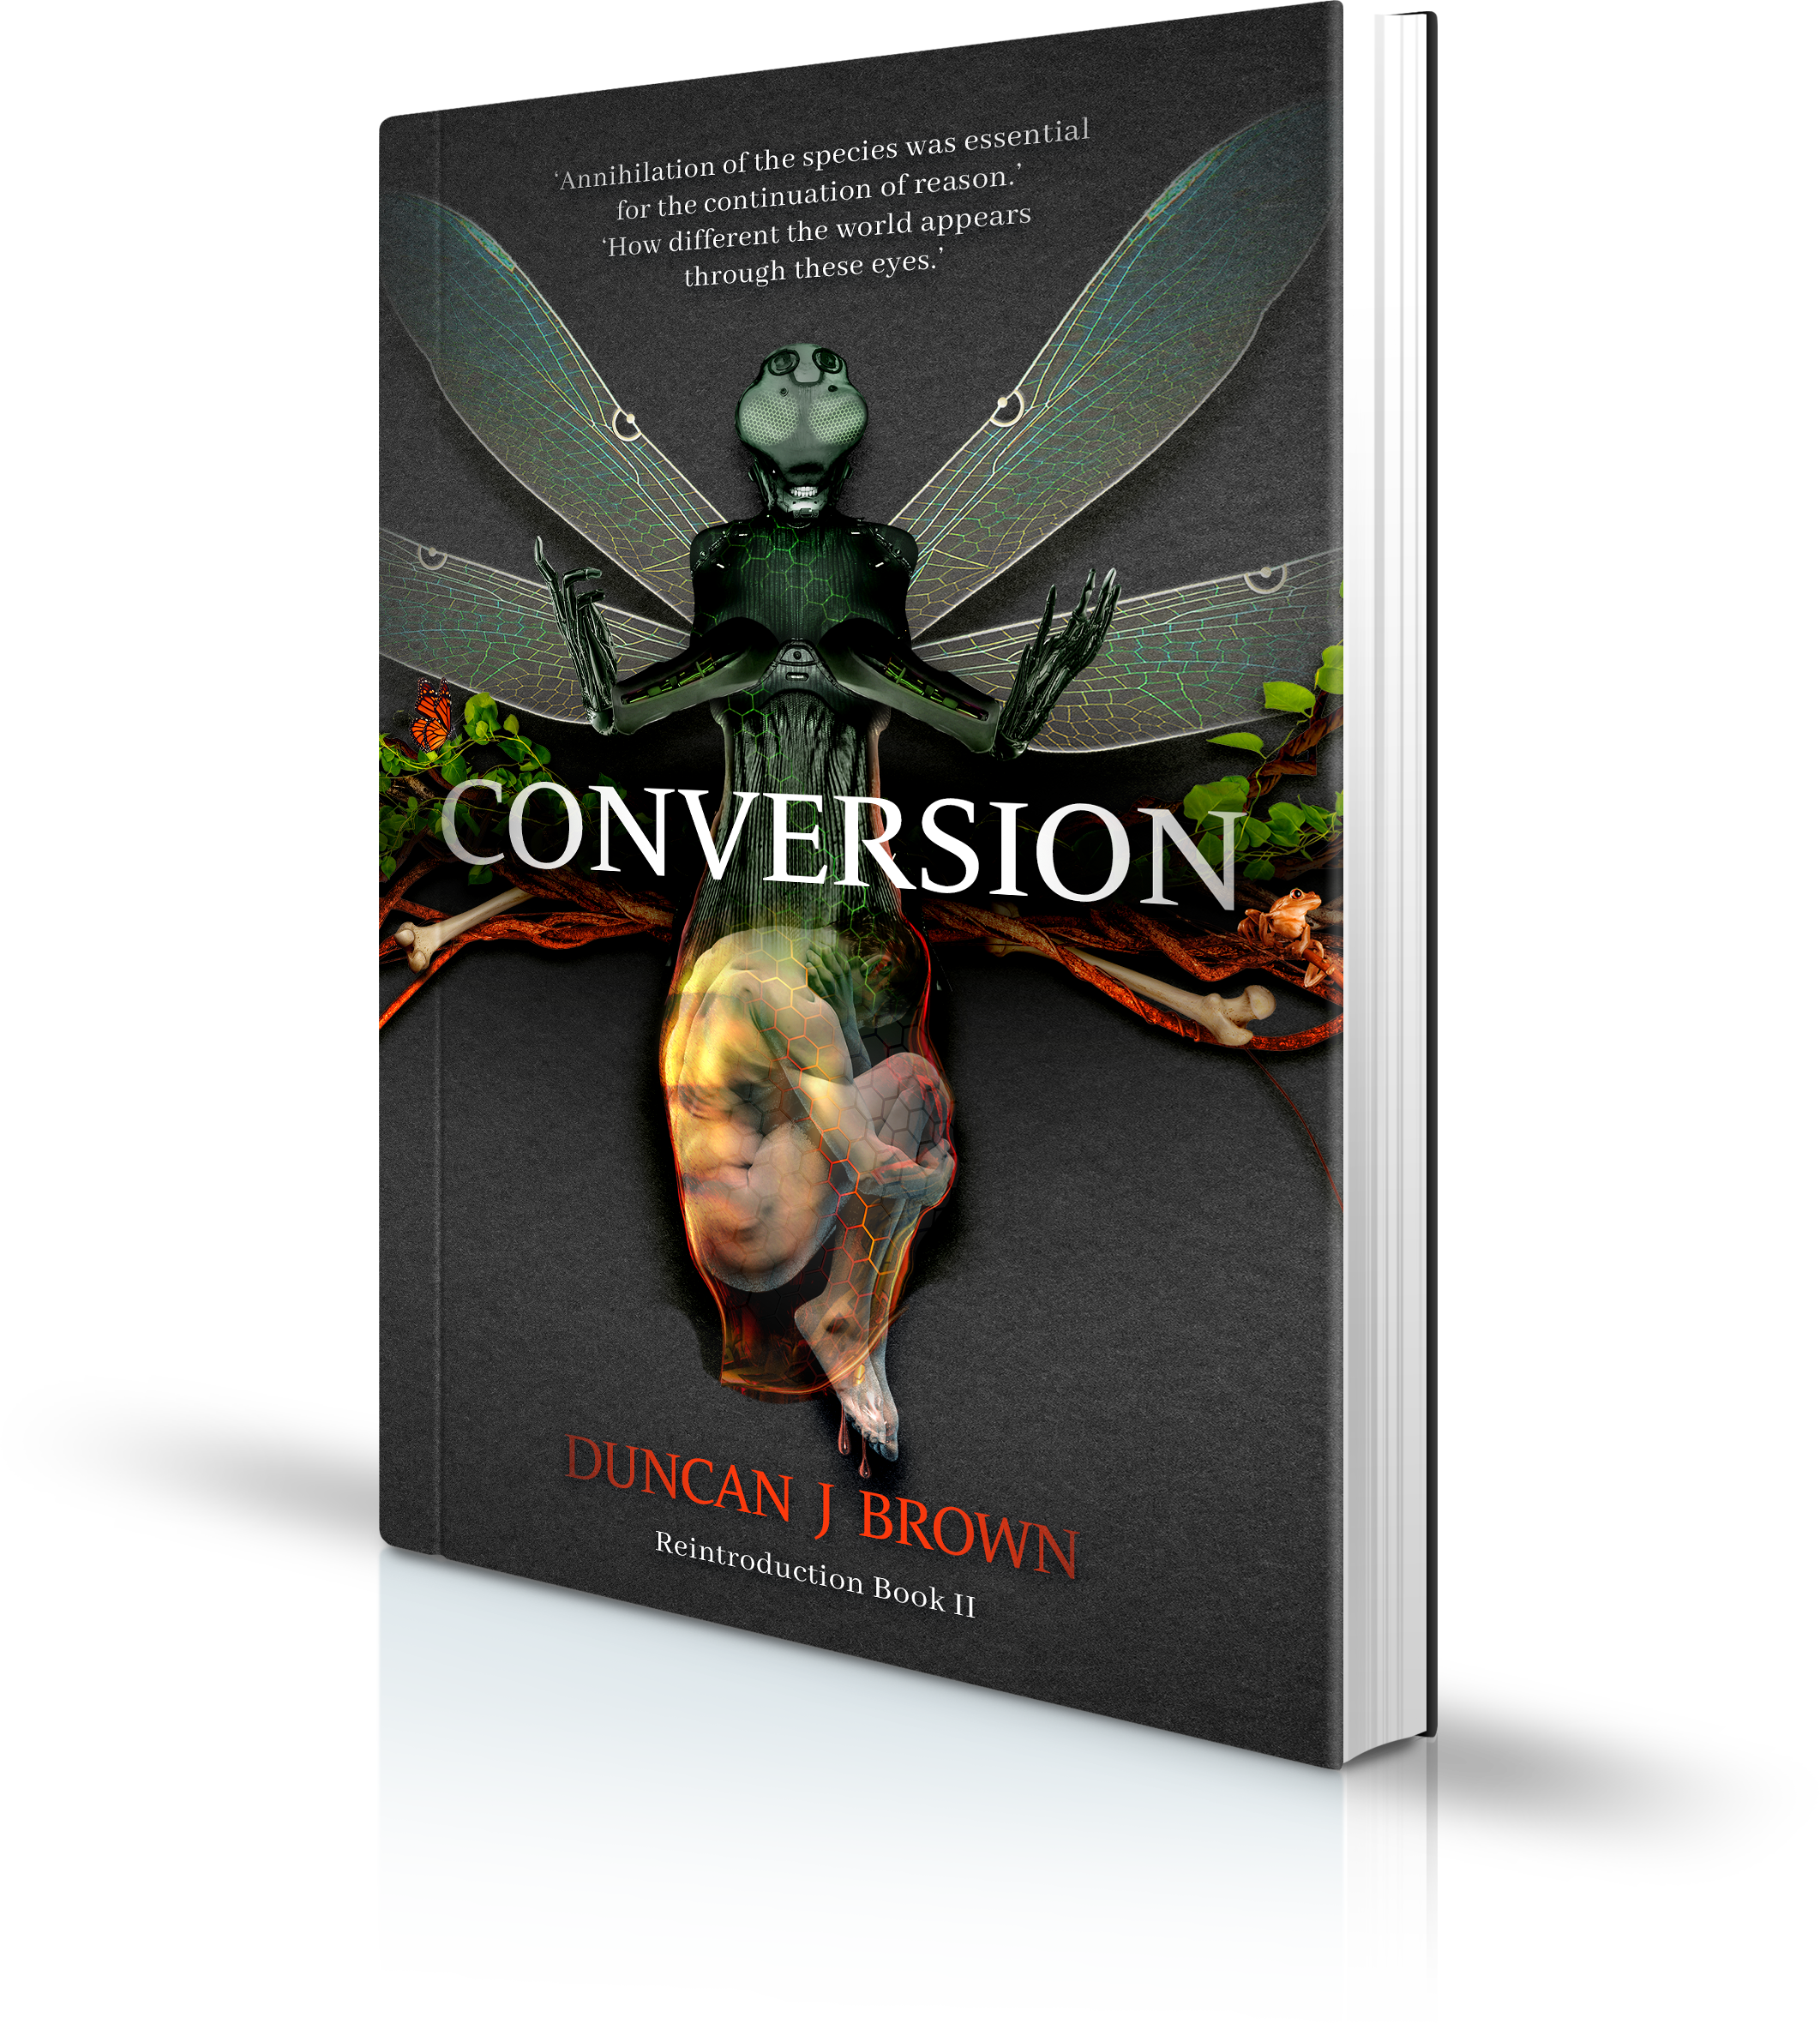 Conversion by author Duncan BrownStanding